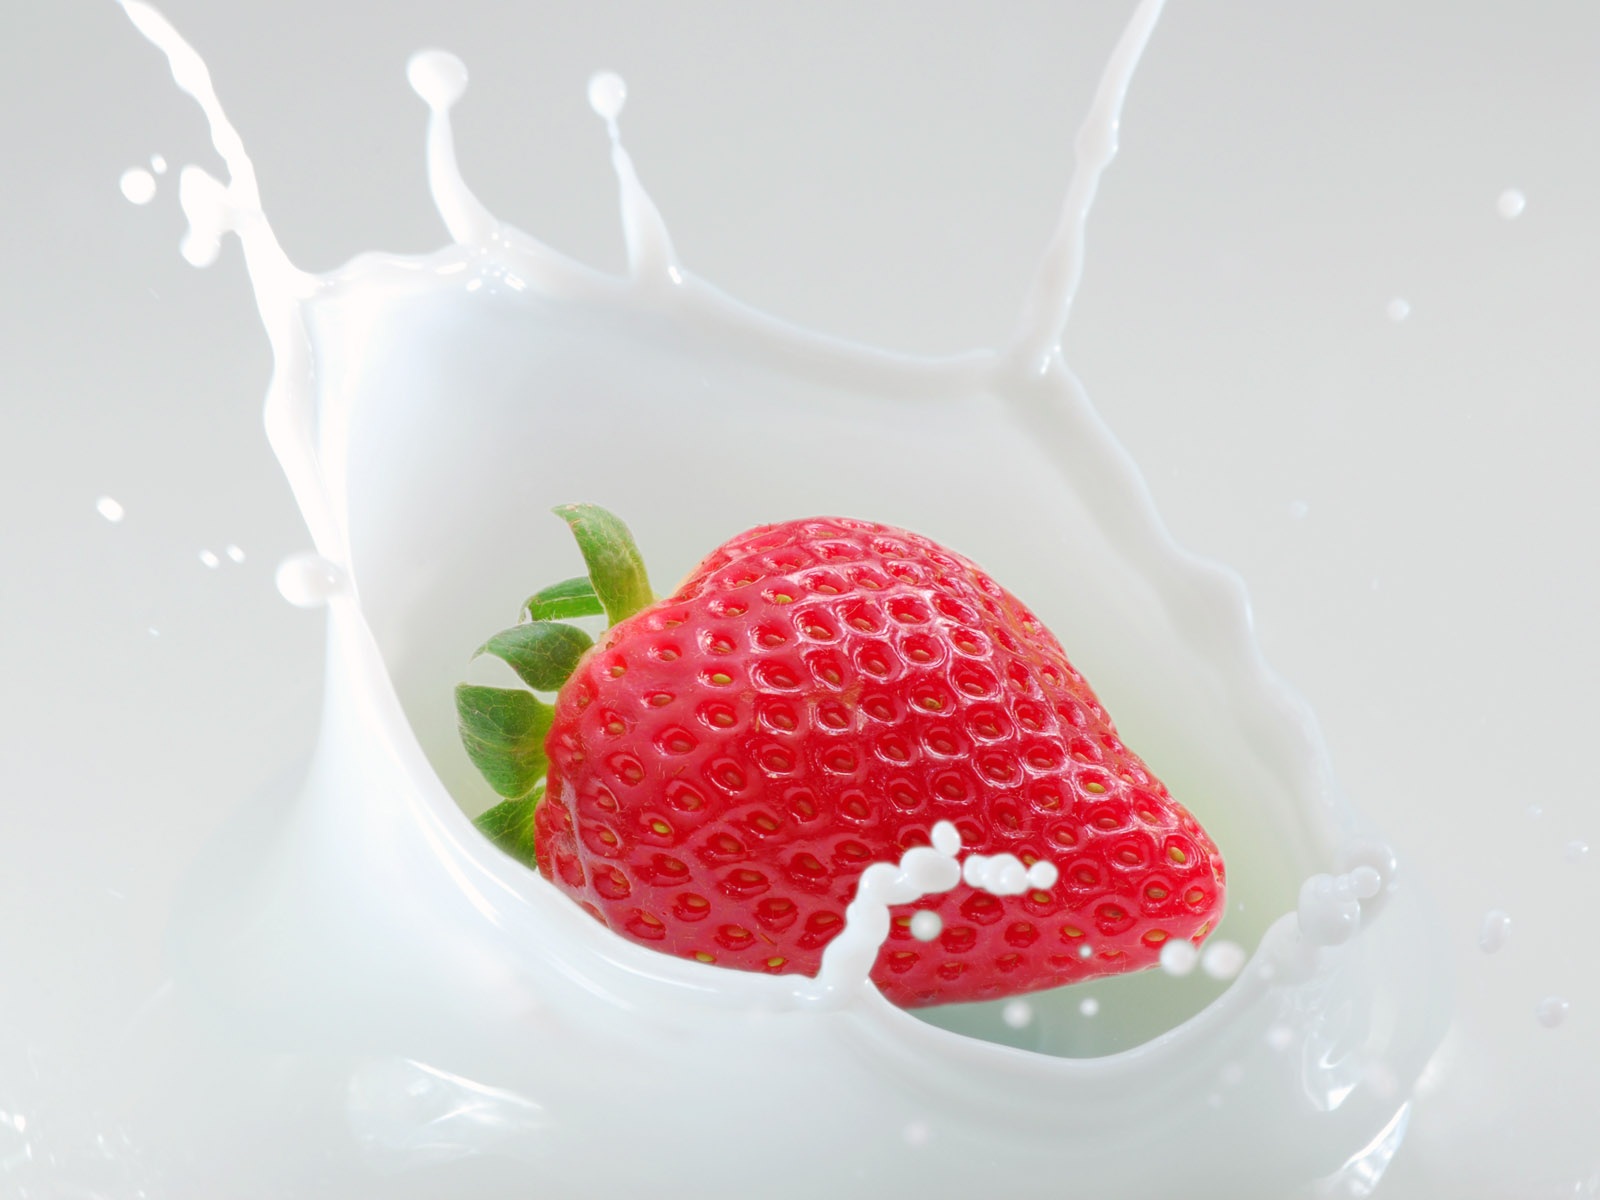 Strawberries And Milk Wallpapers - 1600x1200 - 199362